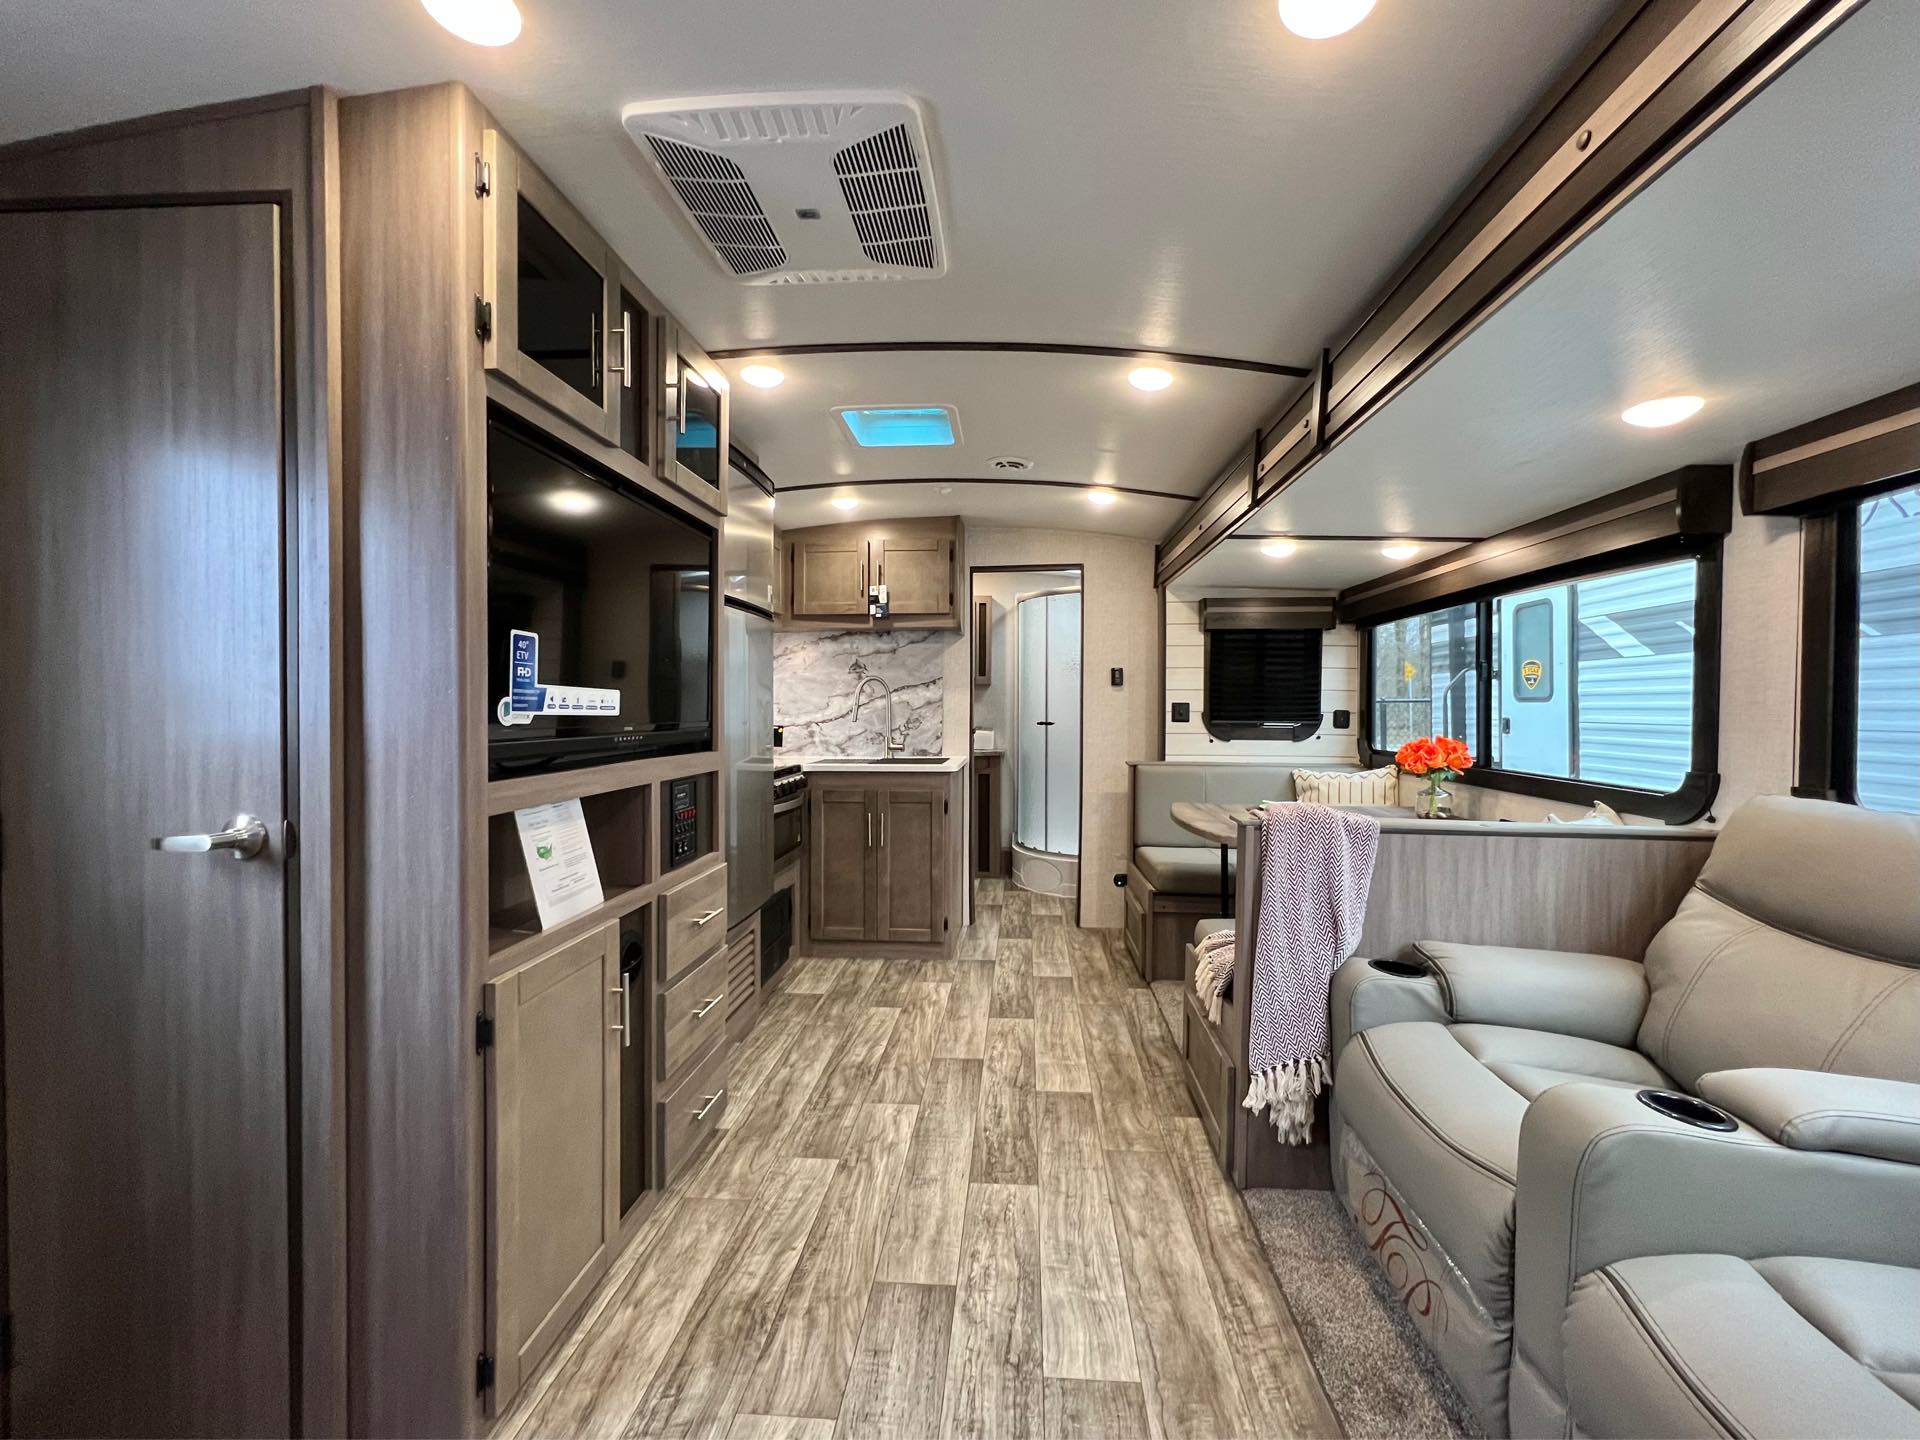 2022 CrossRoads Sunset Trail Super Lite SS253RB at Lee's Country RV